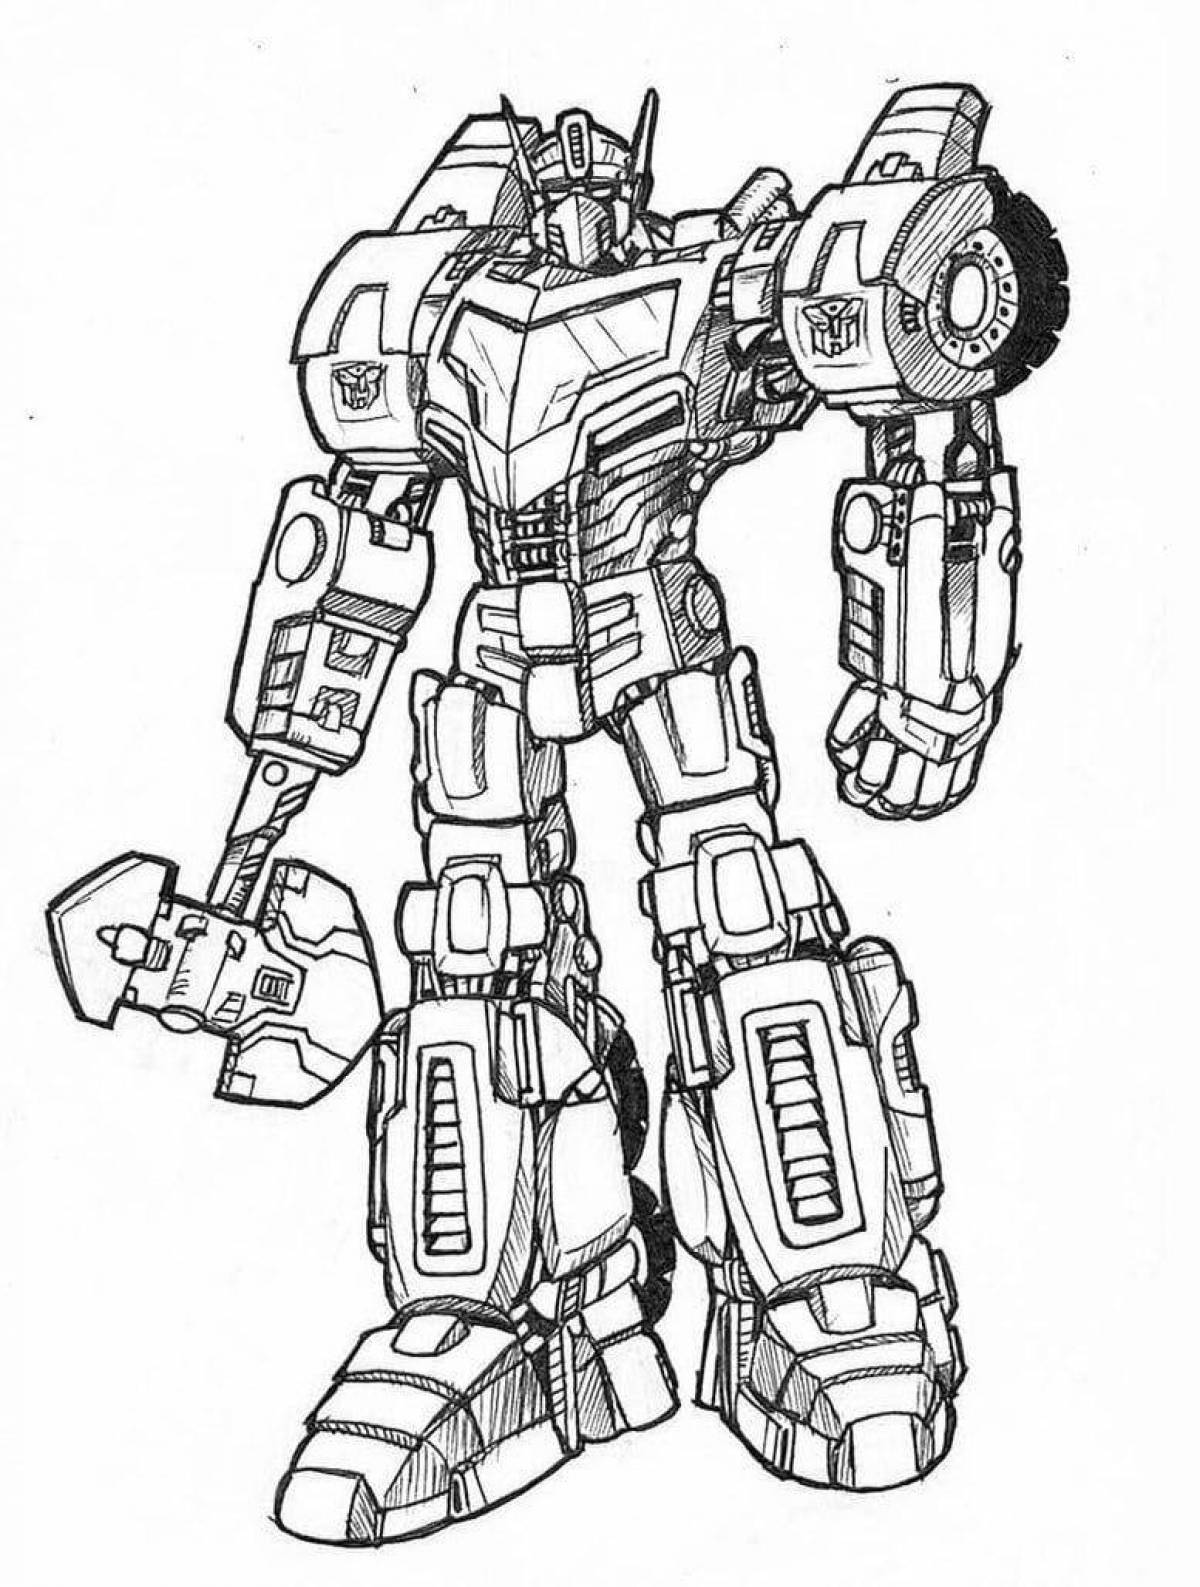 Fabulous Transforming Robot Coloring Pages for Boys